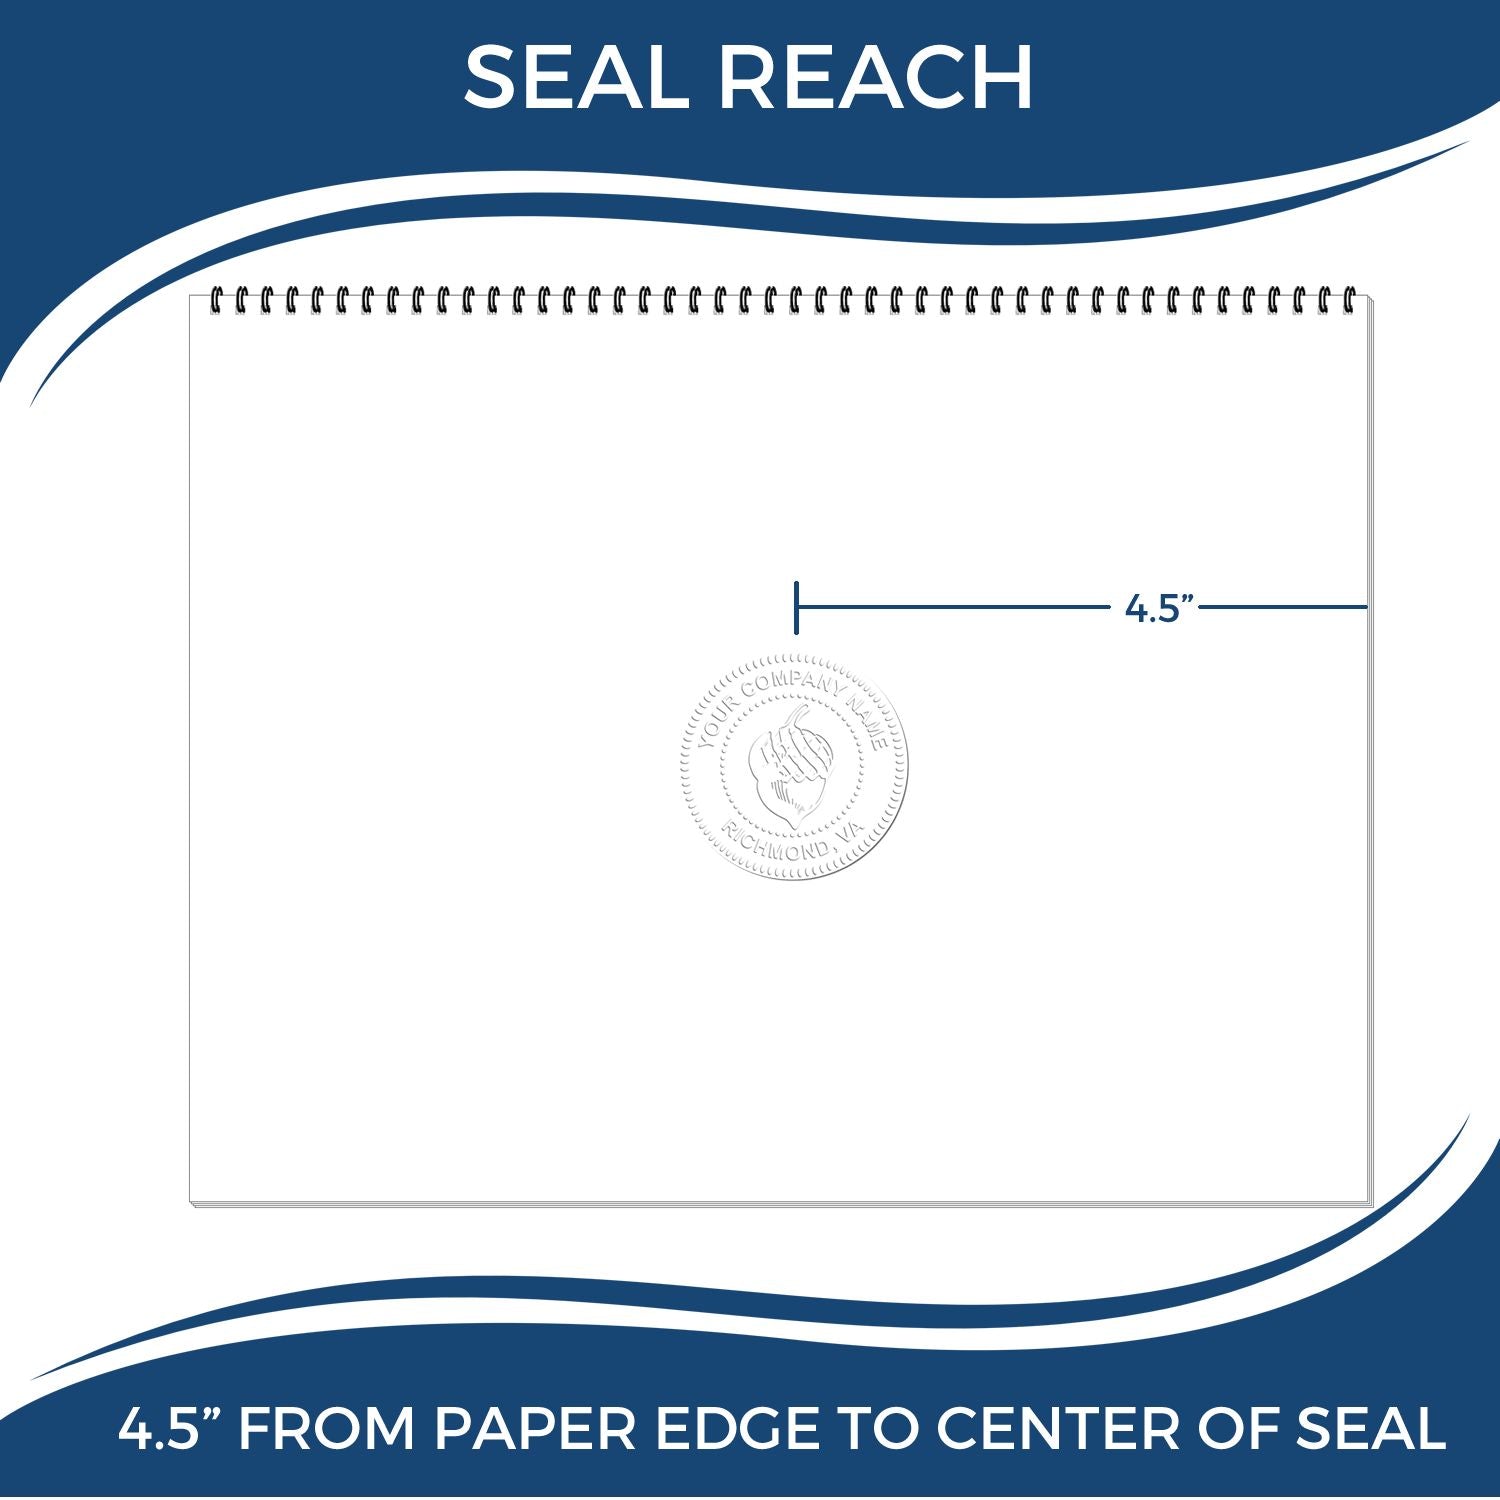 An infographic showing the seal reach which is represented by a ruler and a miniature seal image of the Extended Long Reach Maryland Surveyor Embosser